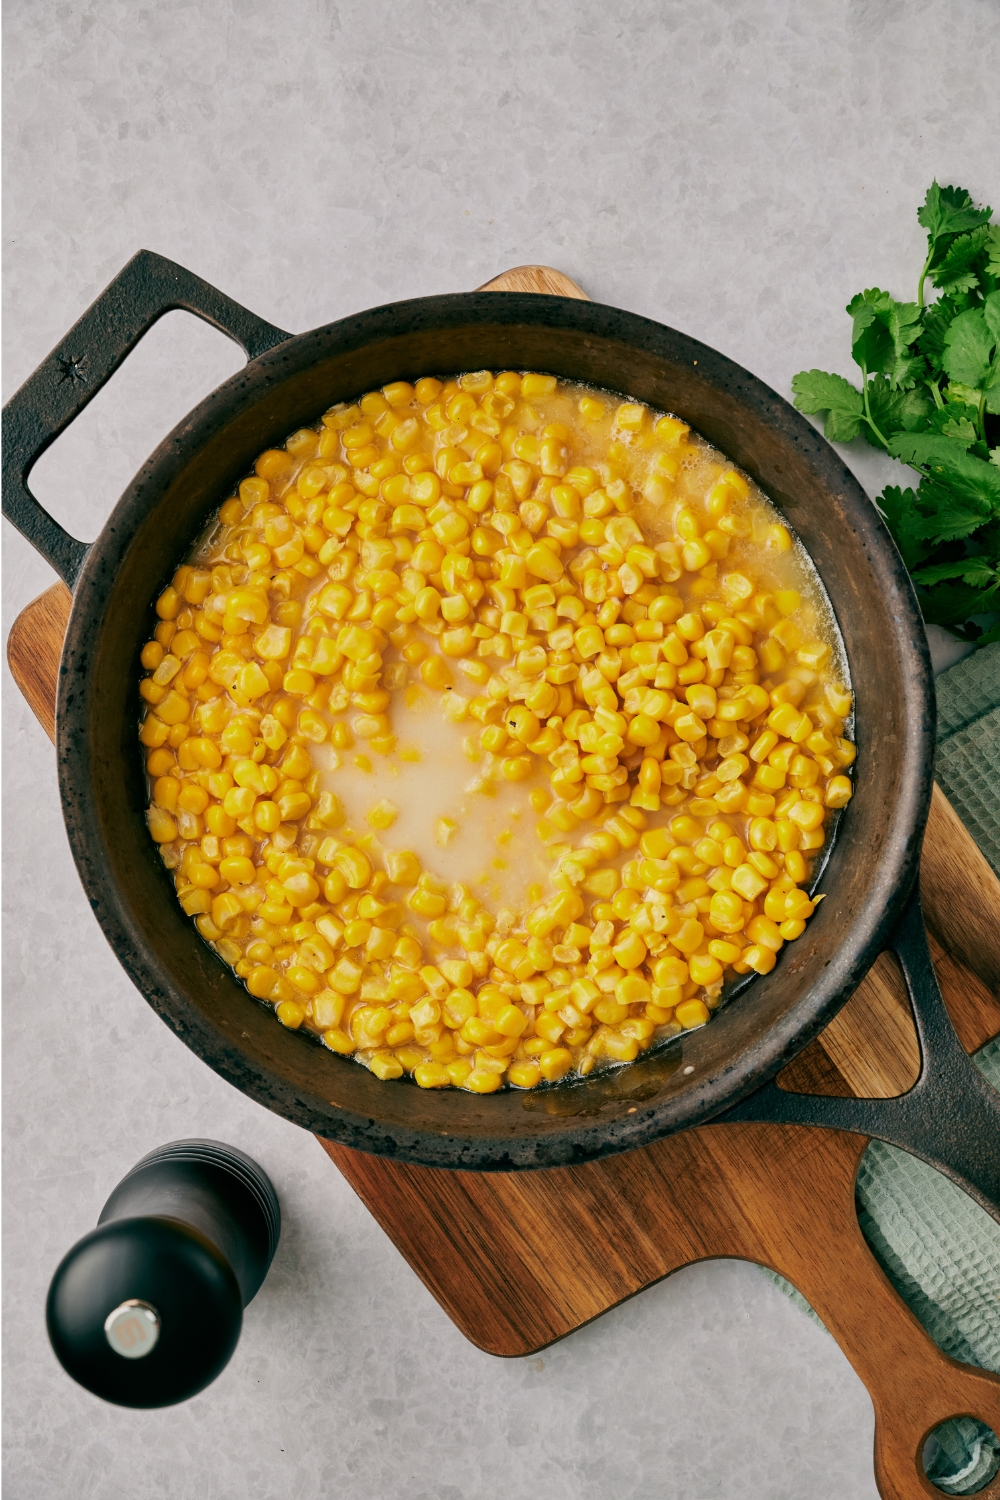 A cast iron skillet with fried corn being cooked.